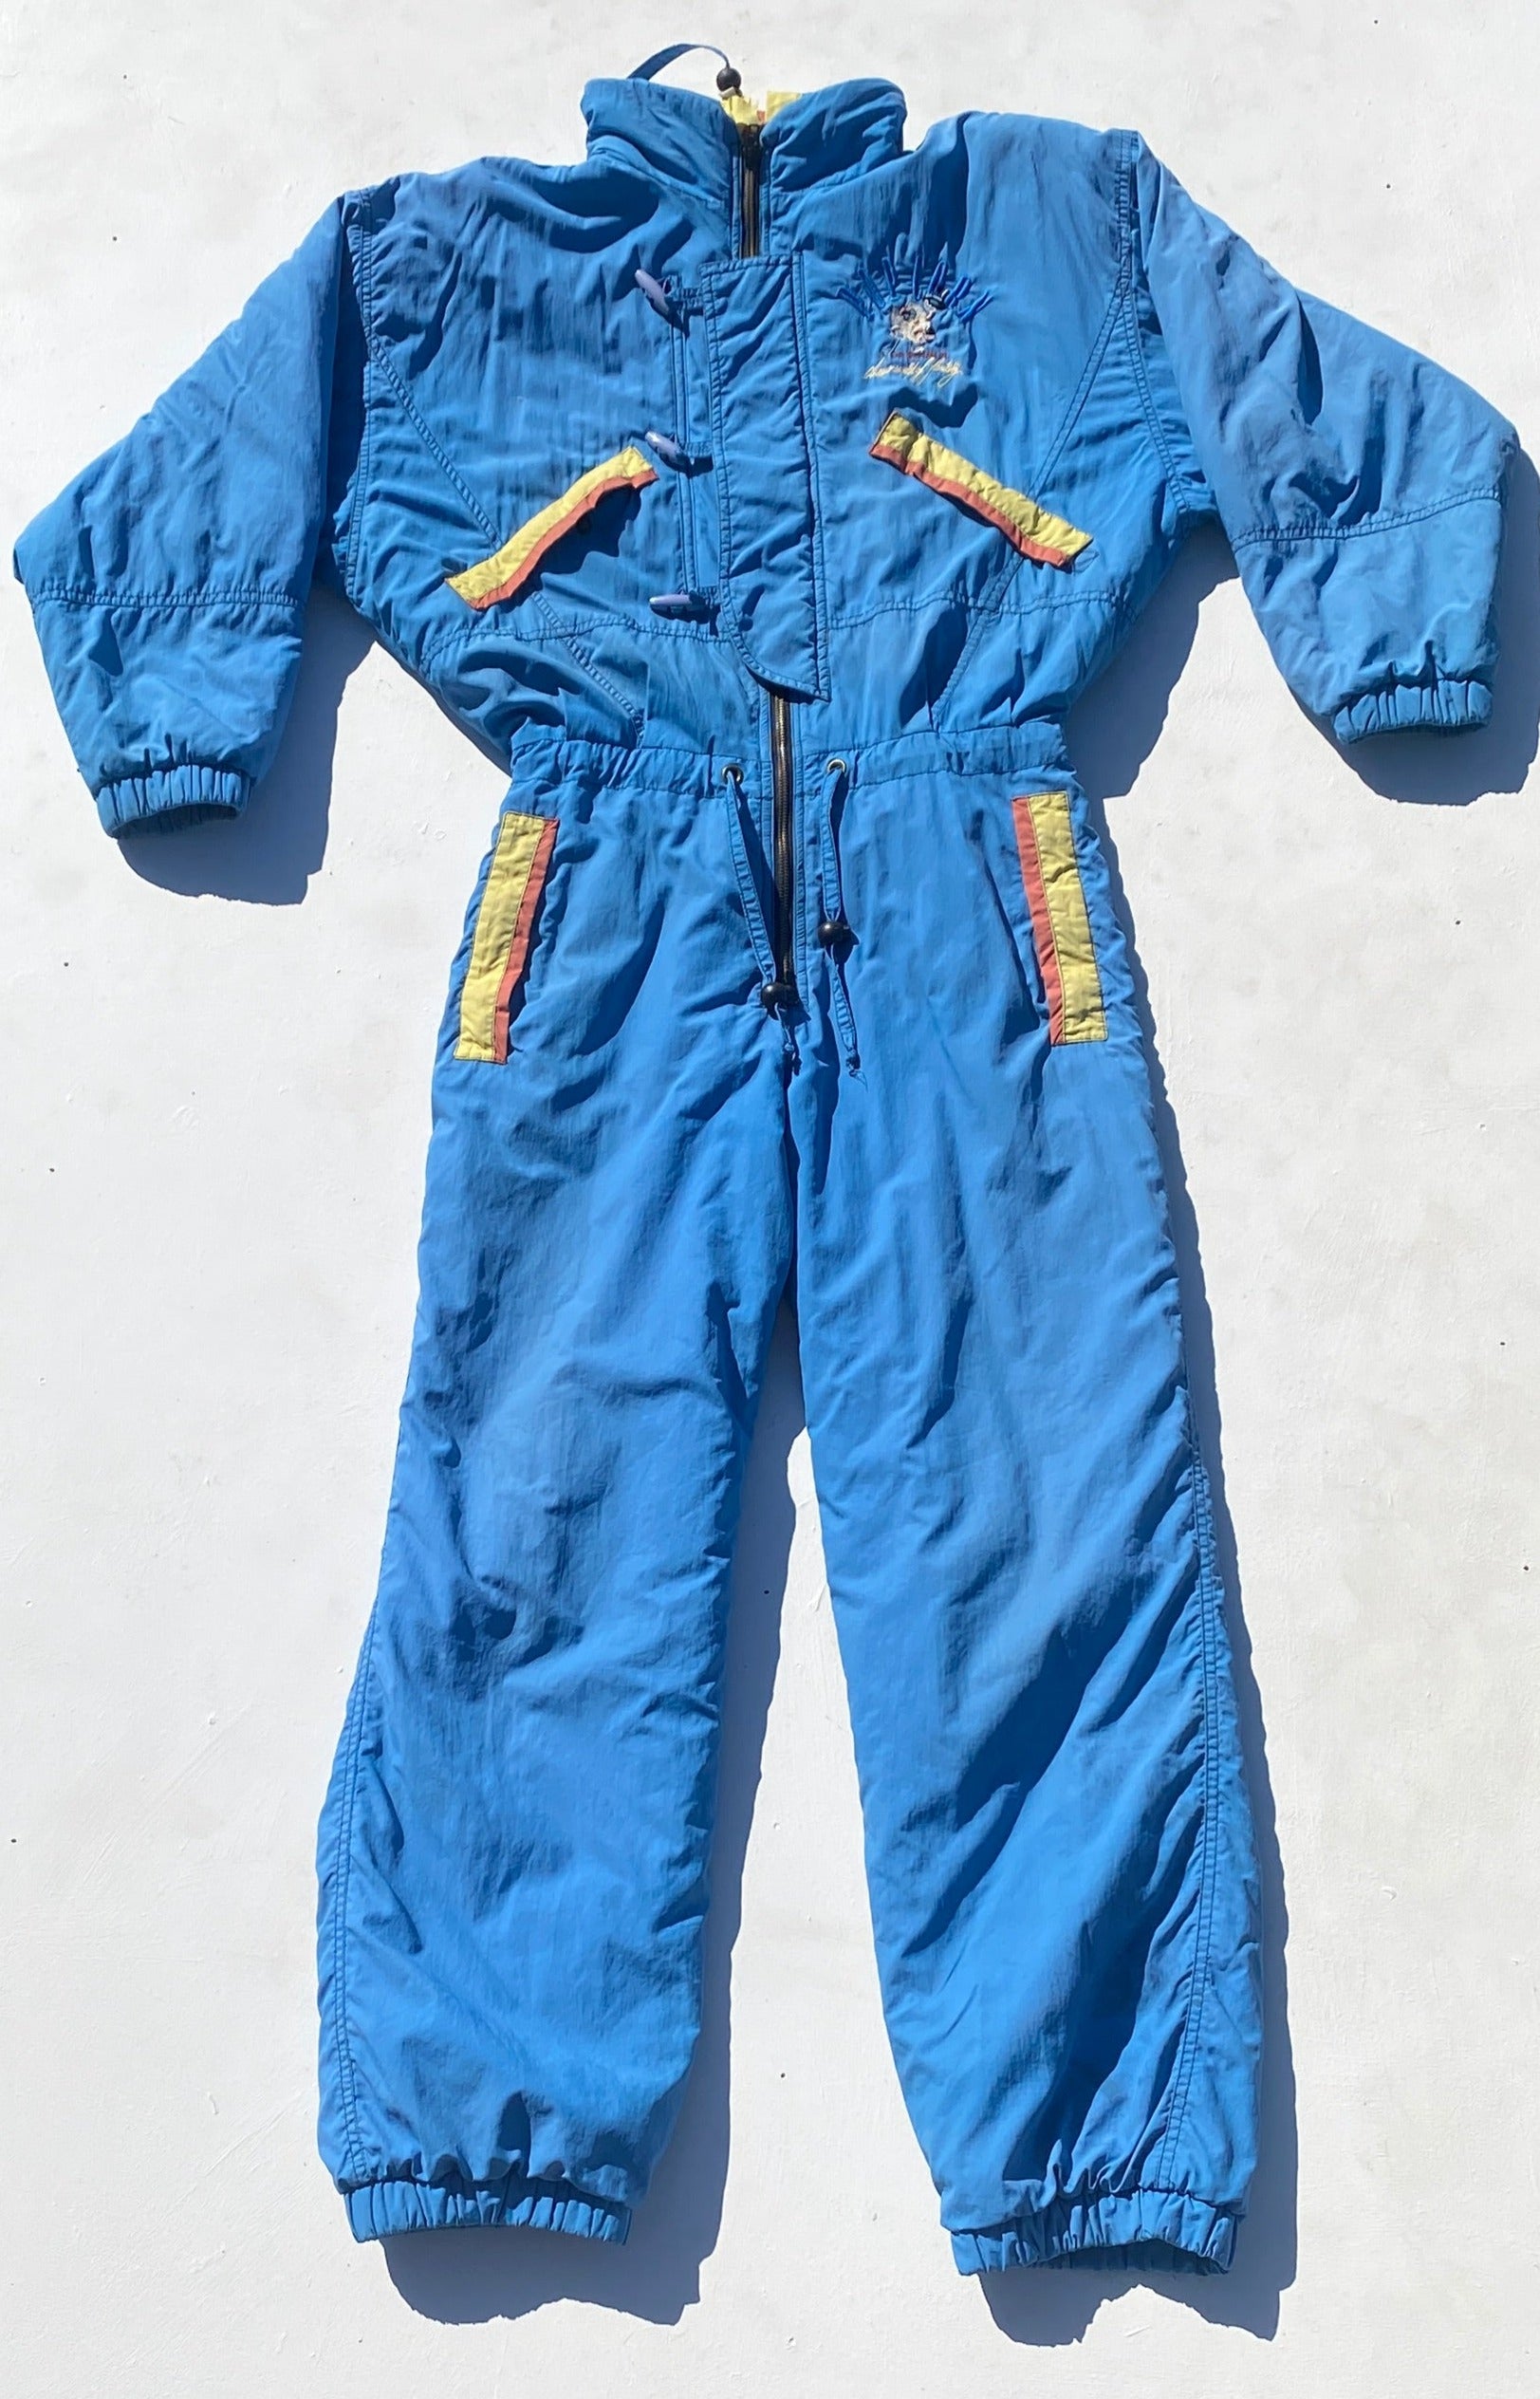 Vintage cornflower blue, with yellow and orange stripe "10S Pour 2" 1-piece snow suit with embroidery "Popcorn 10s Pour 2, A New World of Fantasy" on back shoulder and front right hand chest. Front flat lay